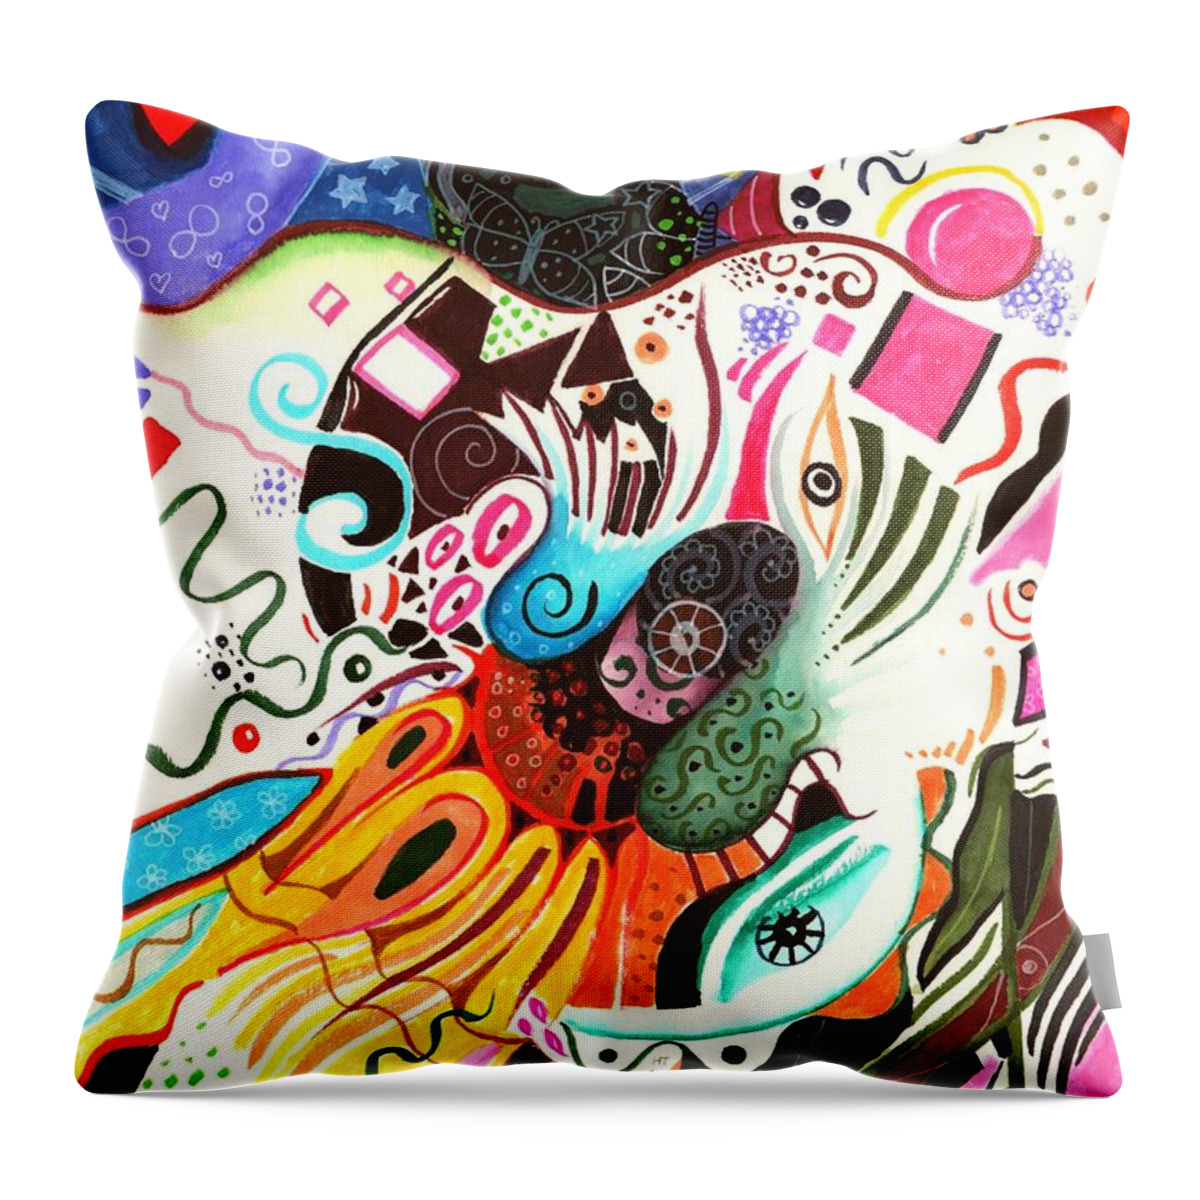 In Search Of A Brighter Day By Helena Tiainen Throw Pillow featuring the painting In Search Of A Brighter Day by Helena Tiainen